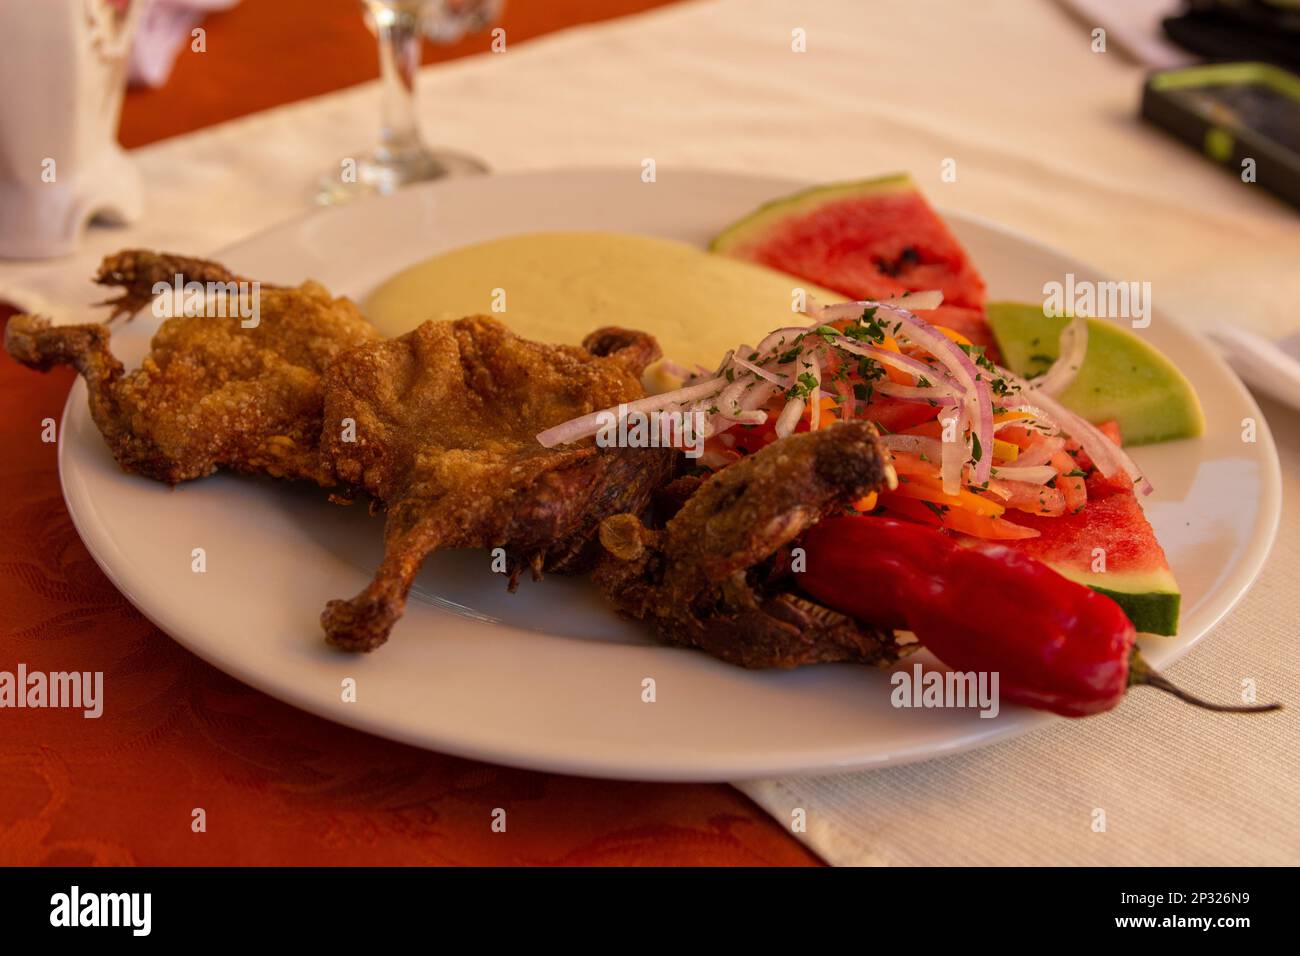 Peruvian Cuy Served on a plate for dinner Stock Photo